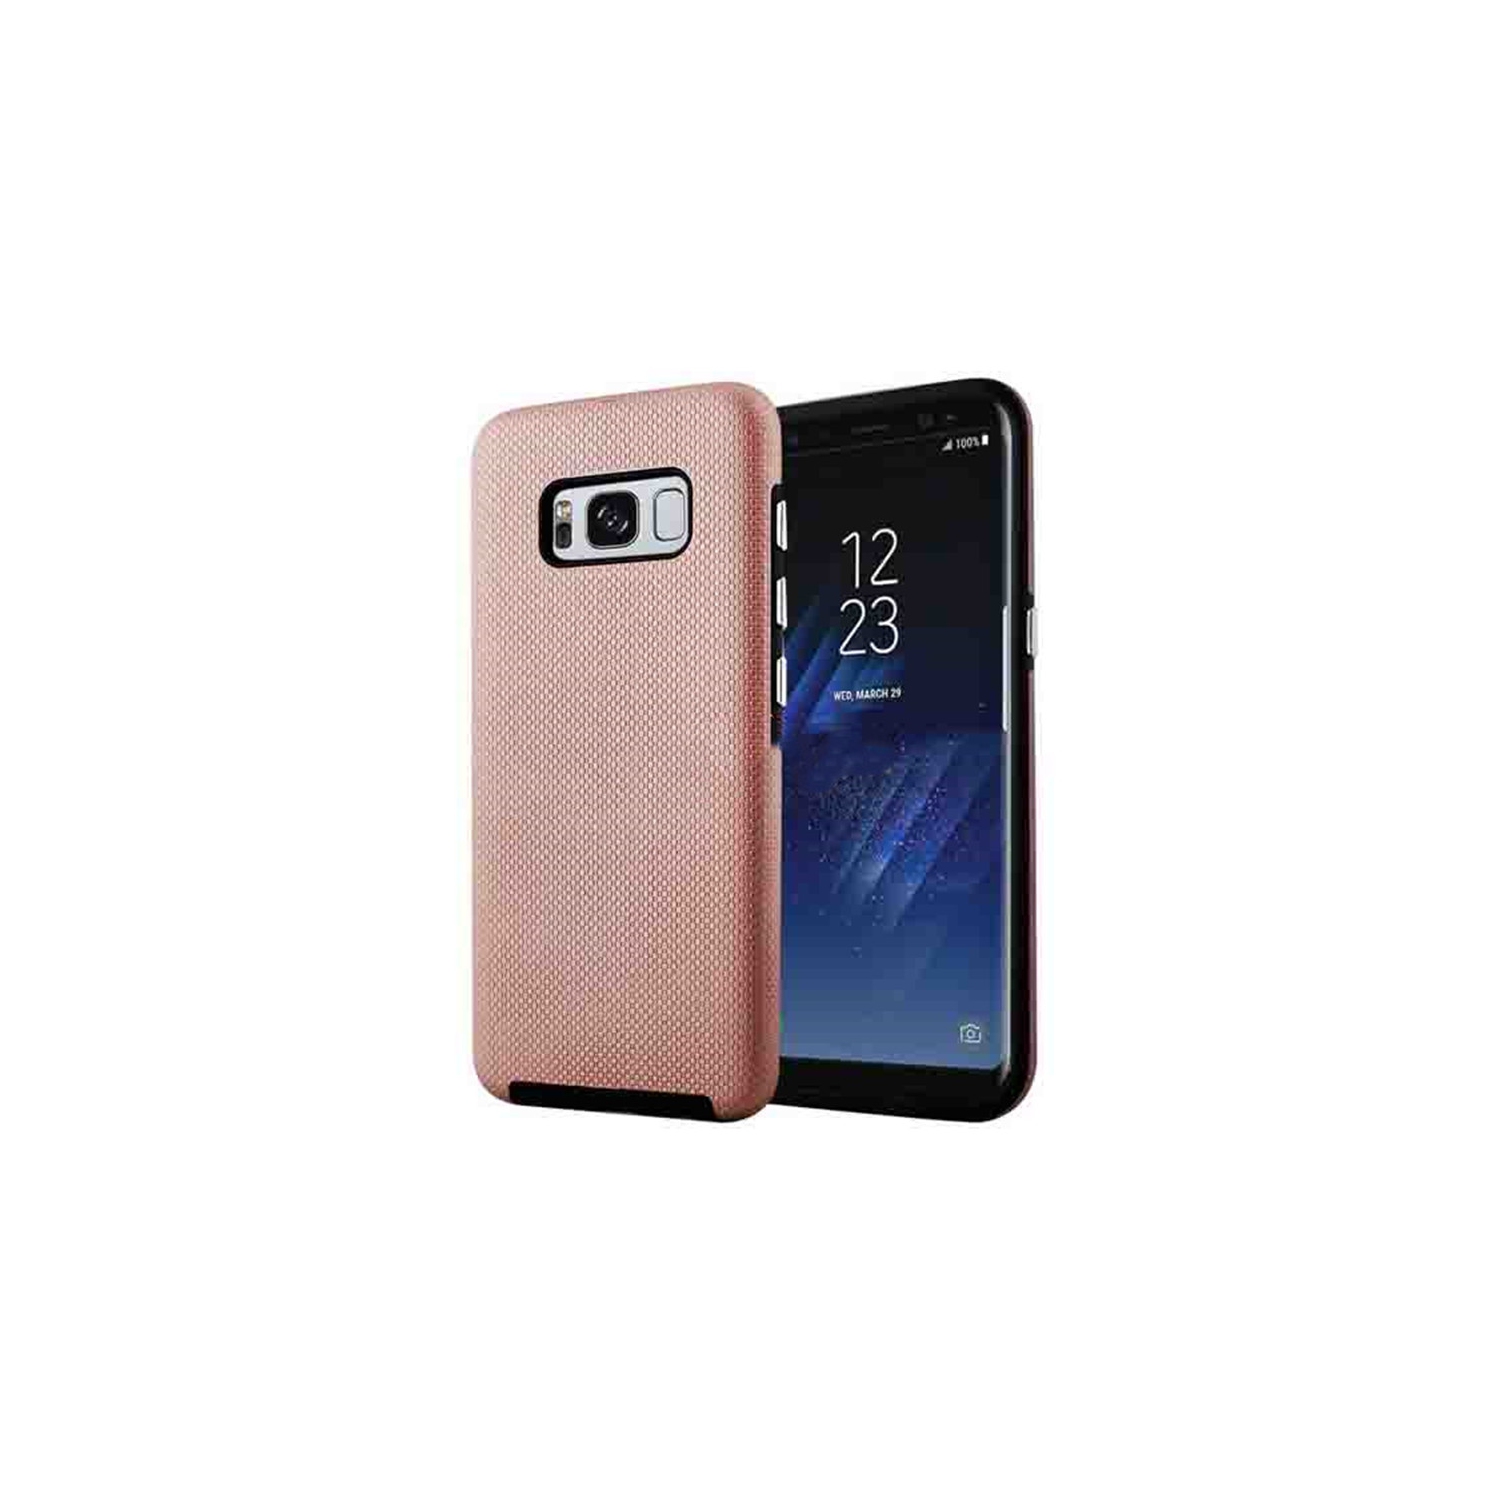 【CSmart】 Slim Fitted Hybrid Hard PC Shell Shockproof Scratch Resistant Case Cover for Samsung Galaxy S8, Rose Gold